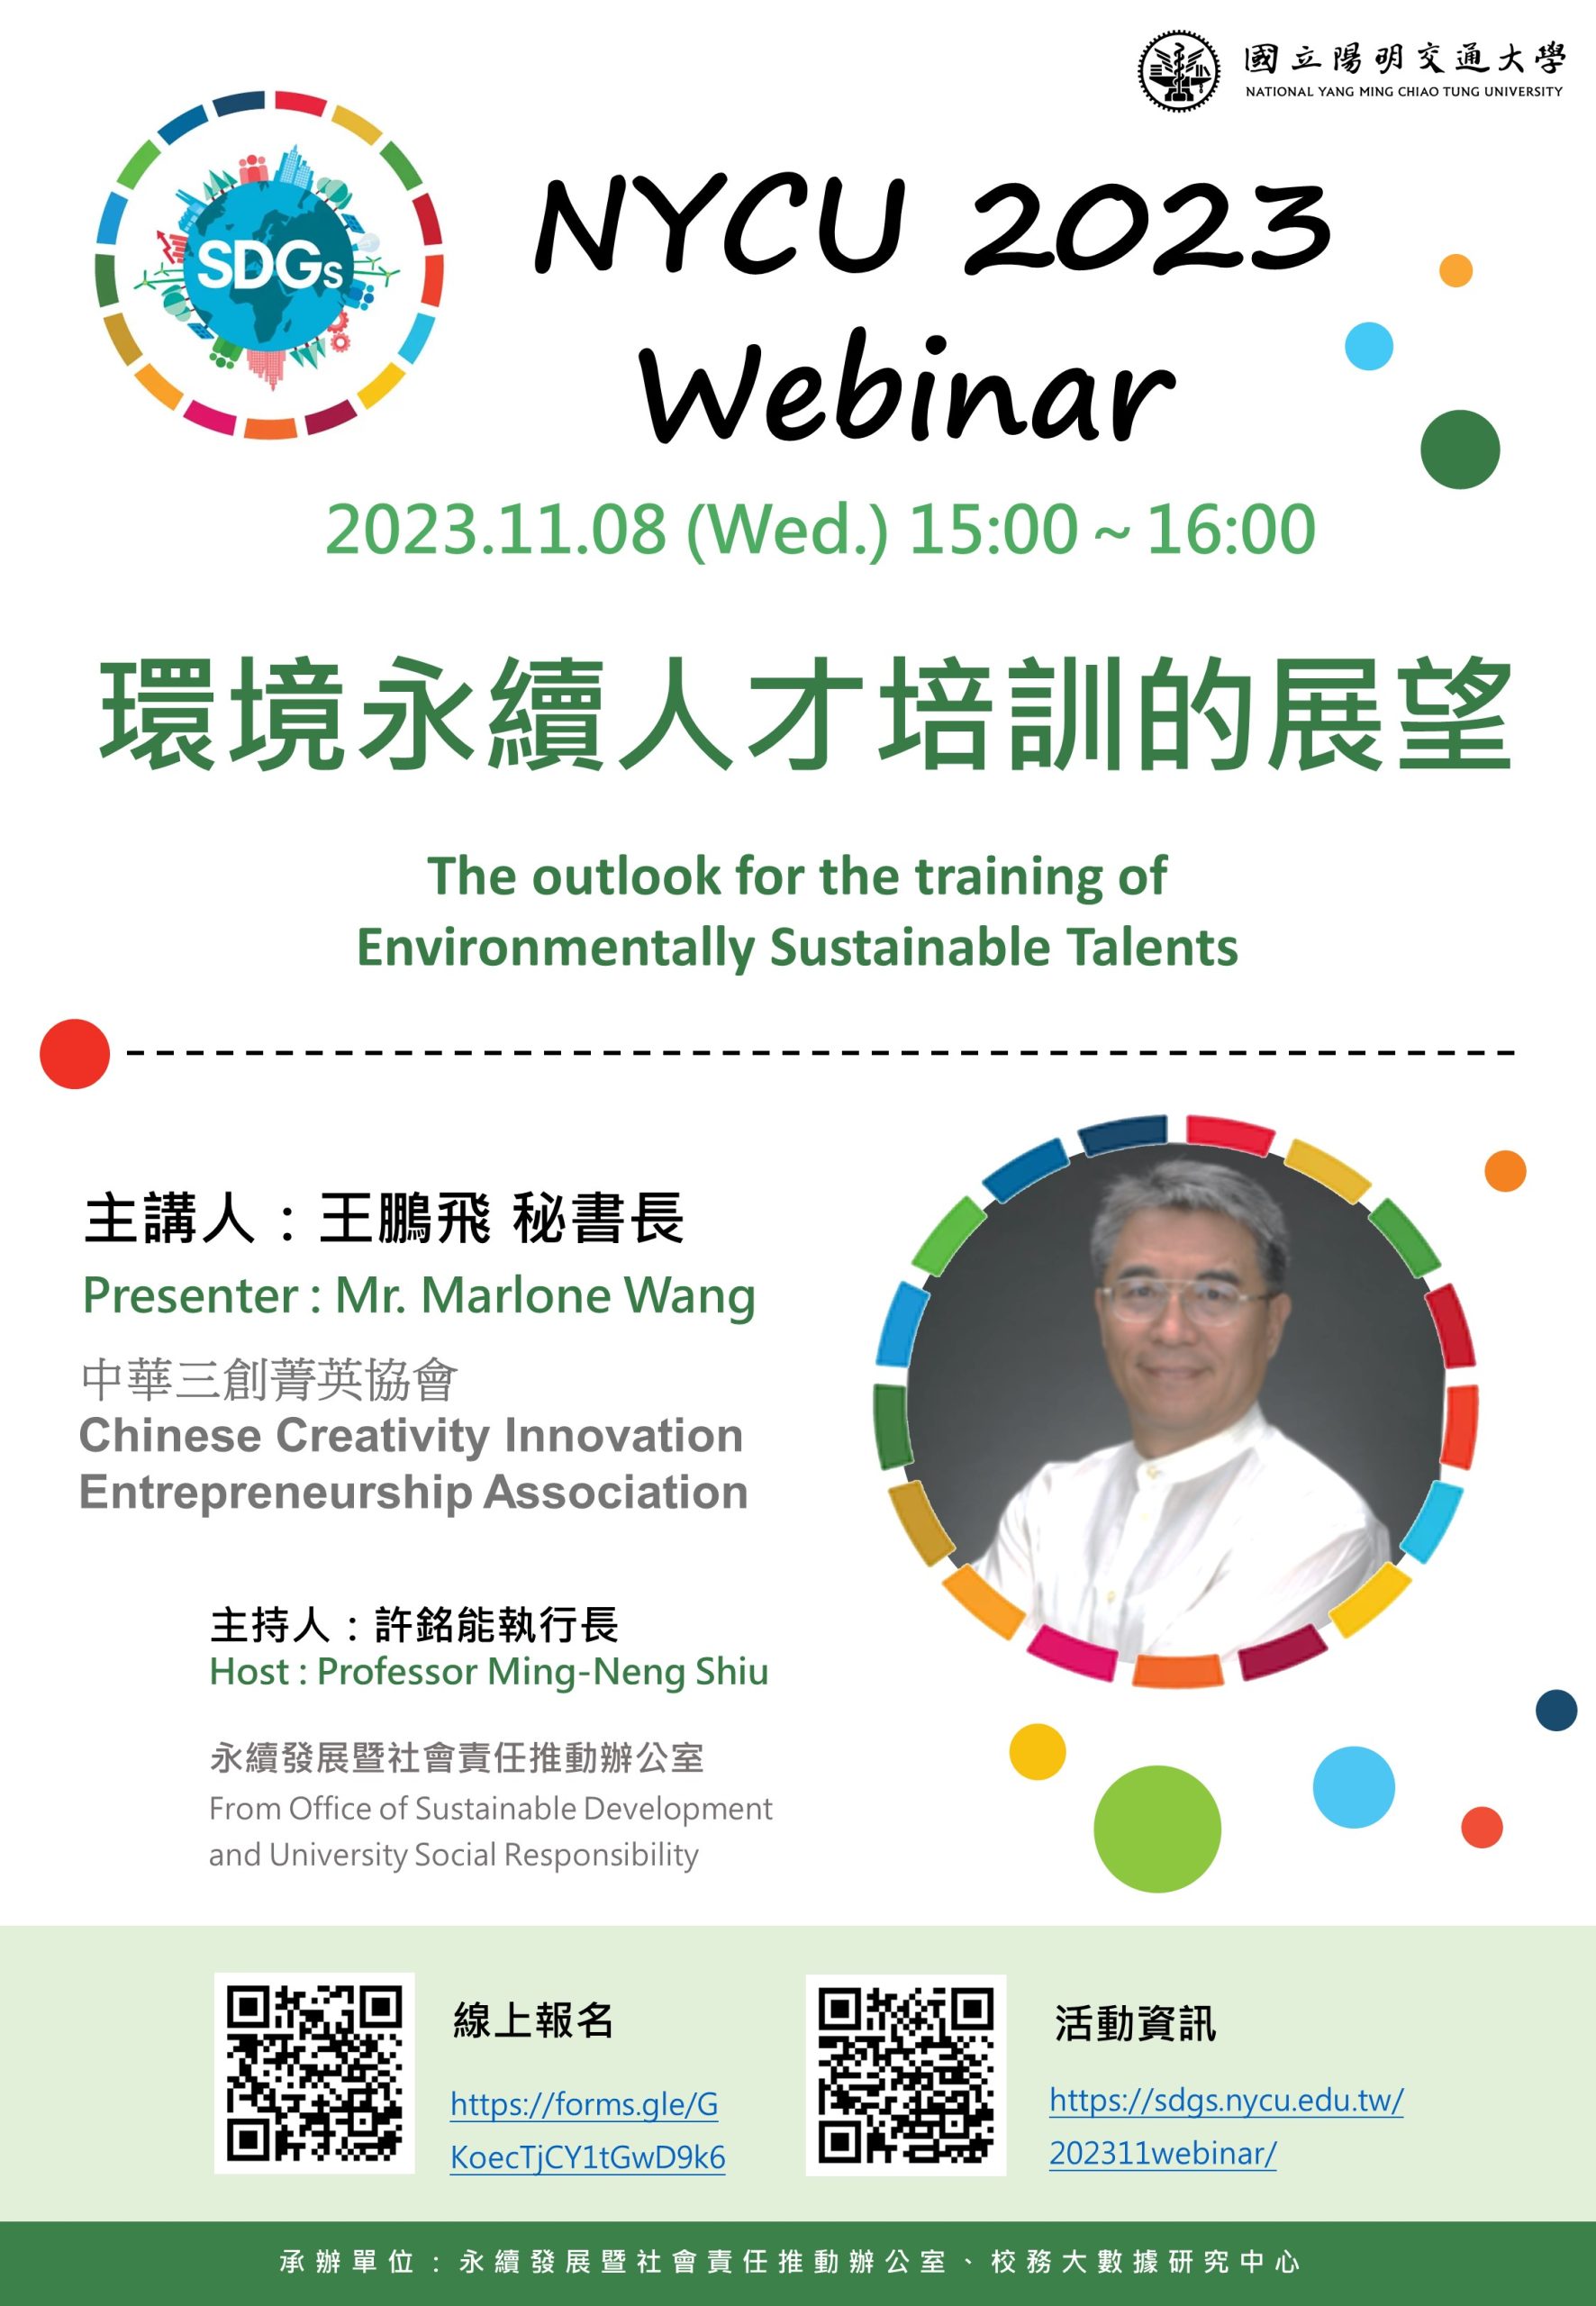 【WEBINAR】The outlook for the training of Environmentally Sustainable Talents